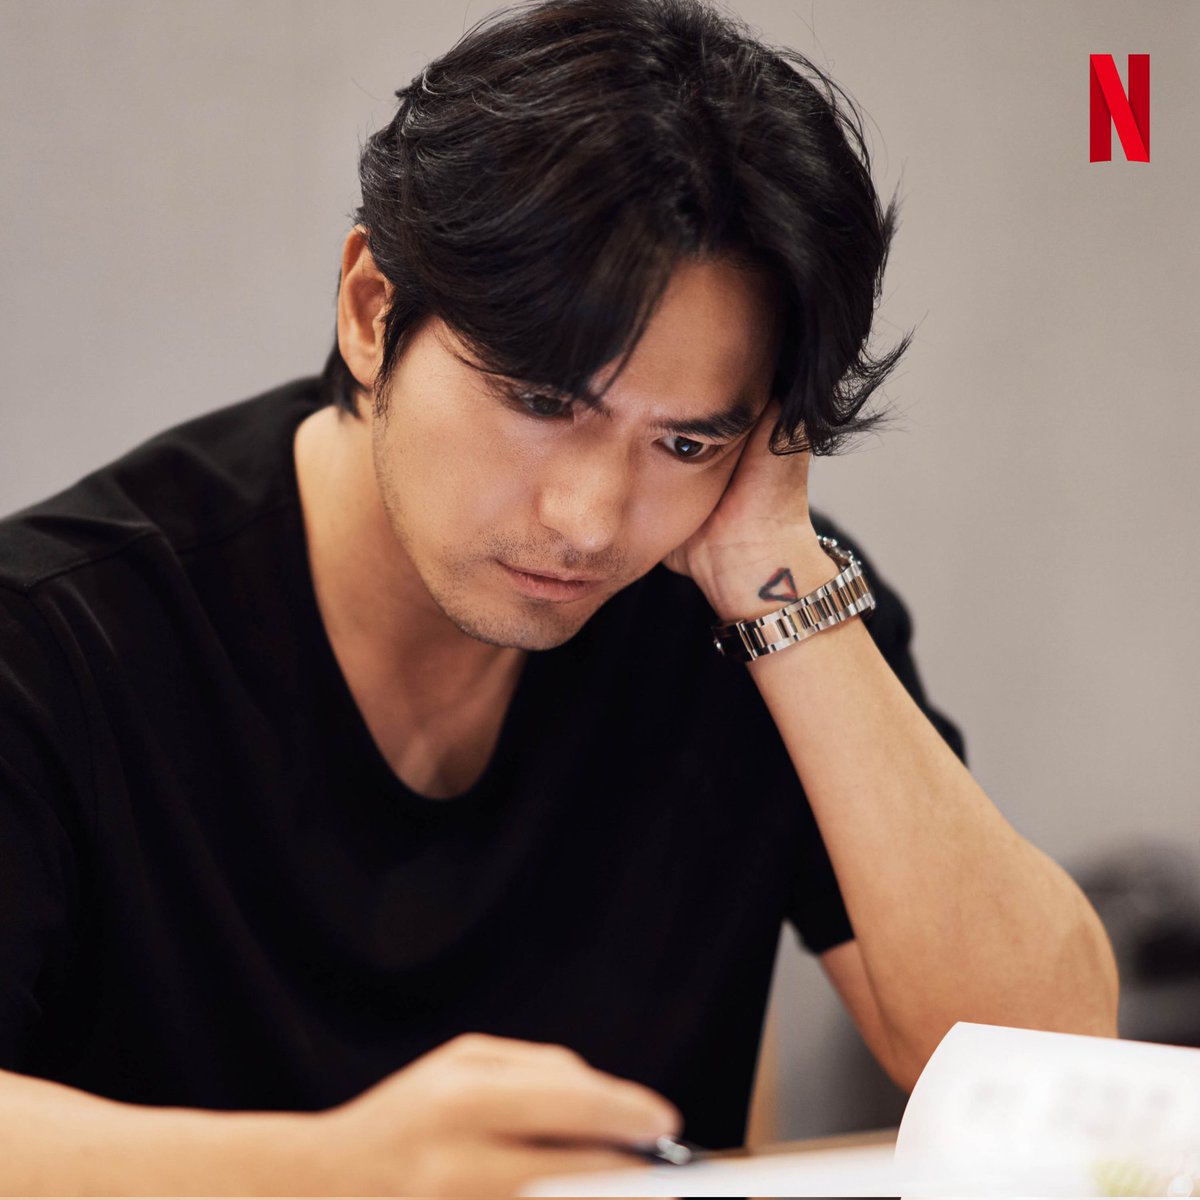 Netflix's original series #SquidGame2 will hold a 2-day, 1-night party in Gapyeong, Gyeonggi on June 11-12
The party is scheduled to consist of water leisure activities & barbecue party. #LeeJinwook has confirmed attendance while others are adjusting their schedules
#SquidGame